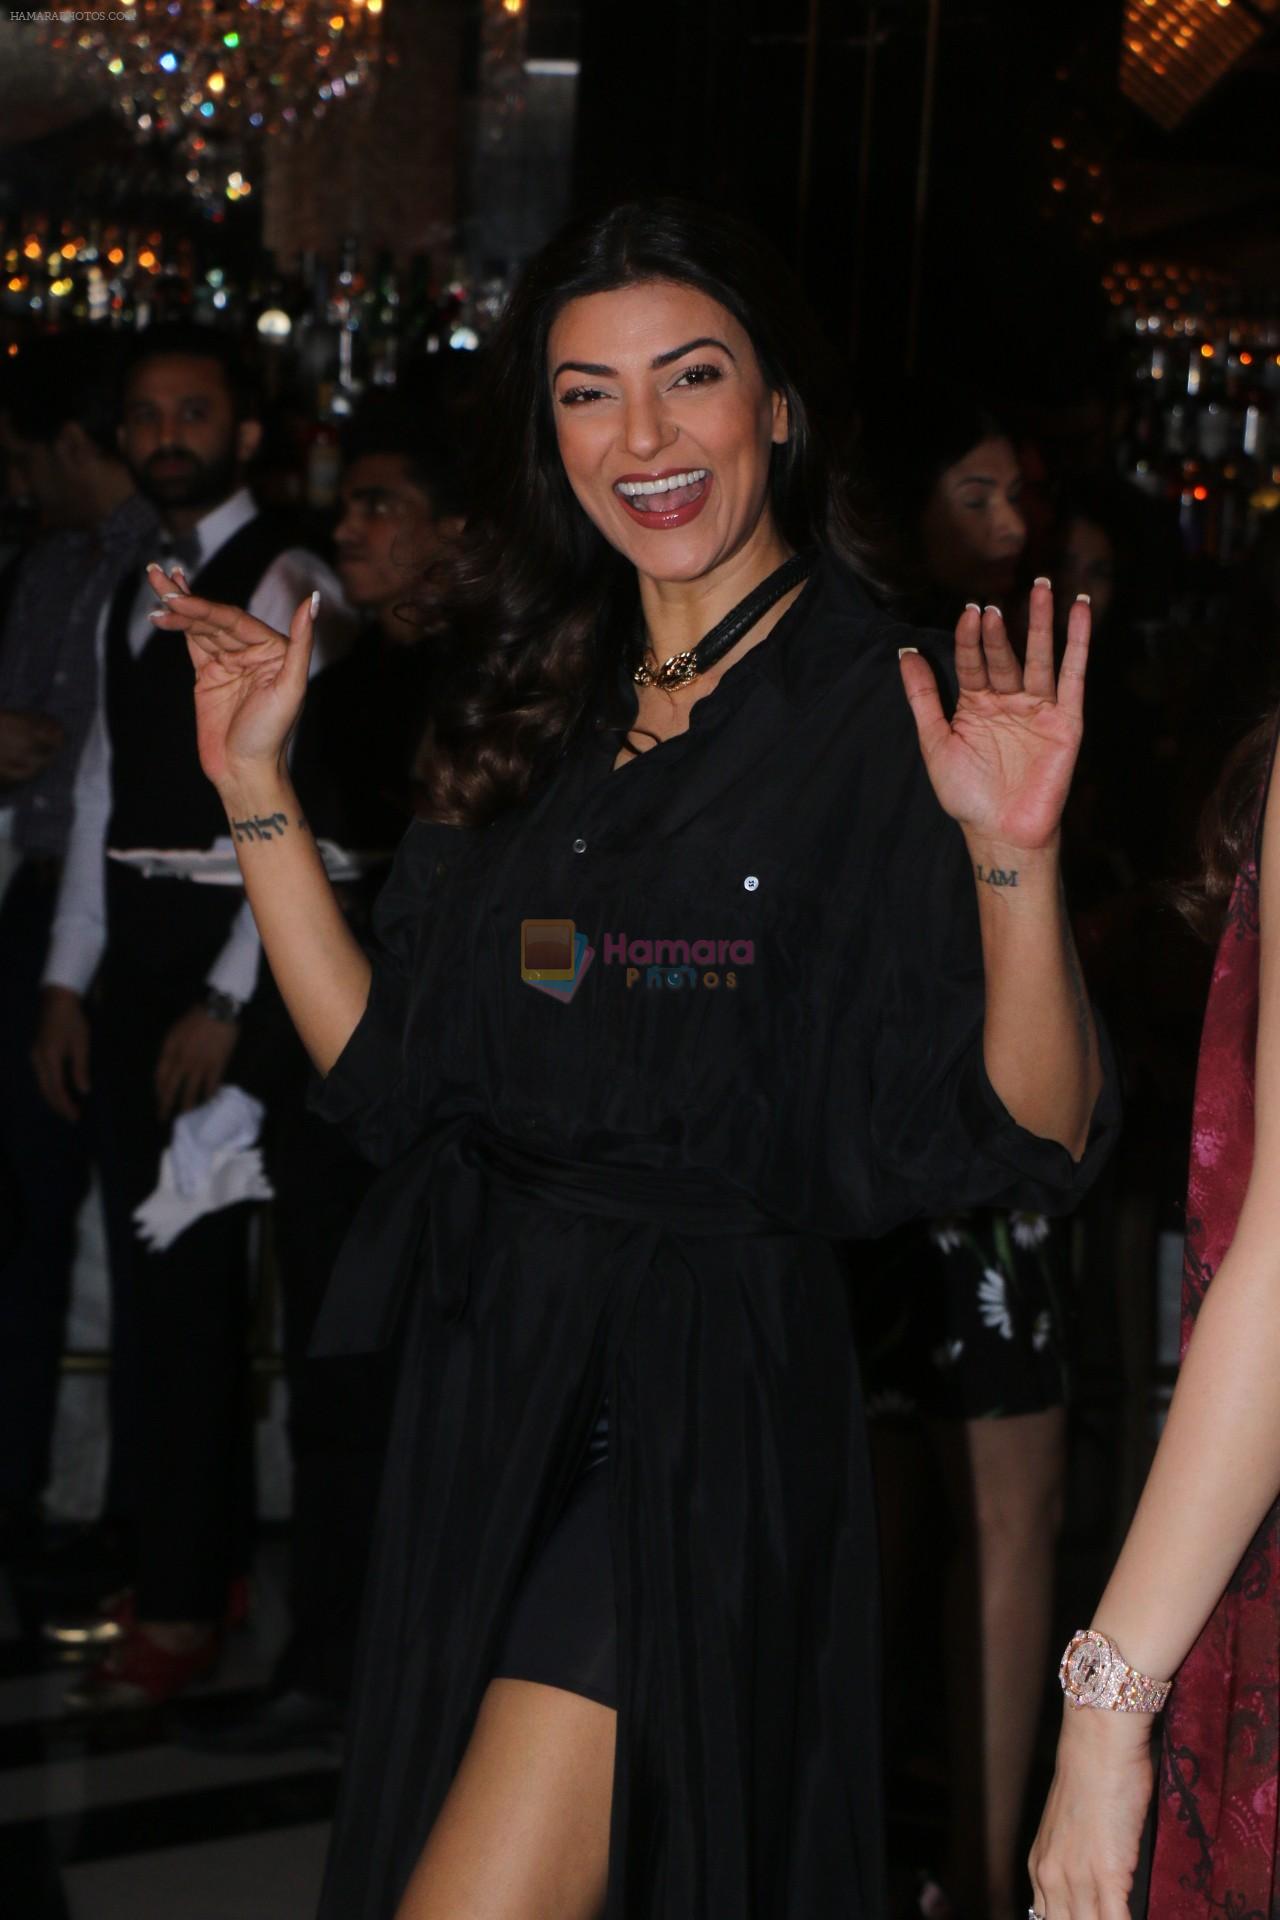 Sushmita Sen At Launch Of Designer Rebecca Dewan's SS 18 Collection Songs Of Summer on 17th Jan 2018